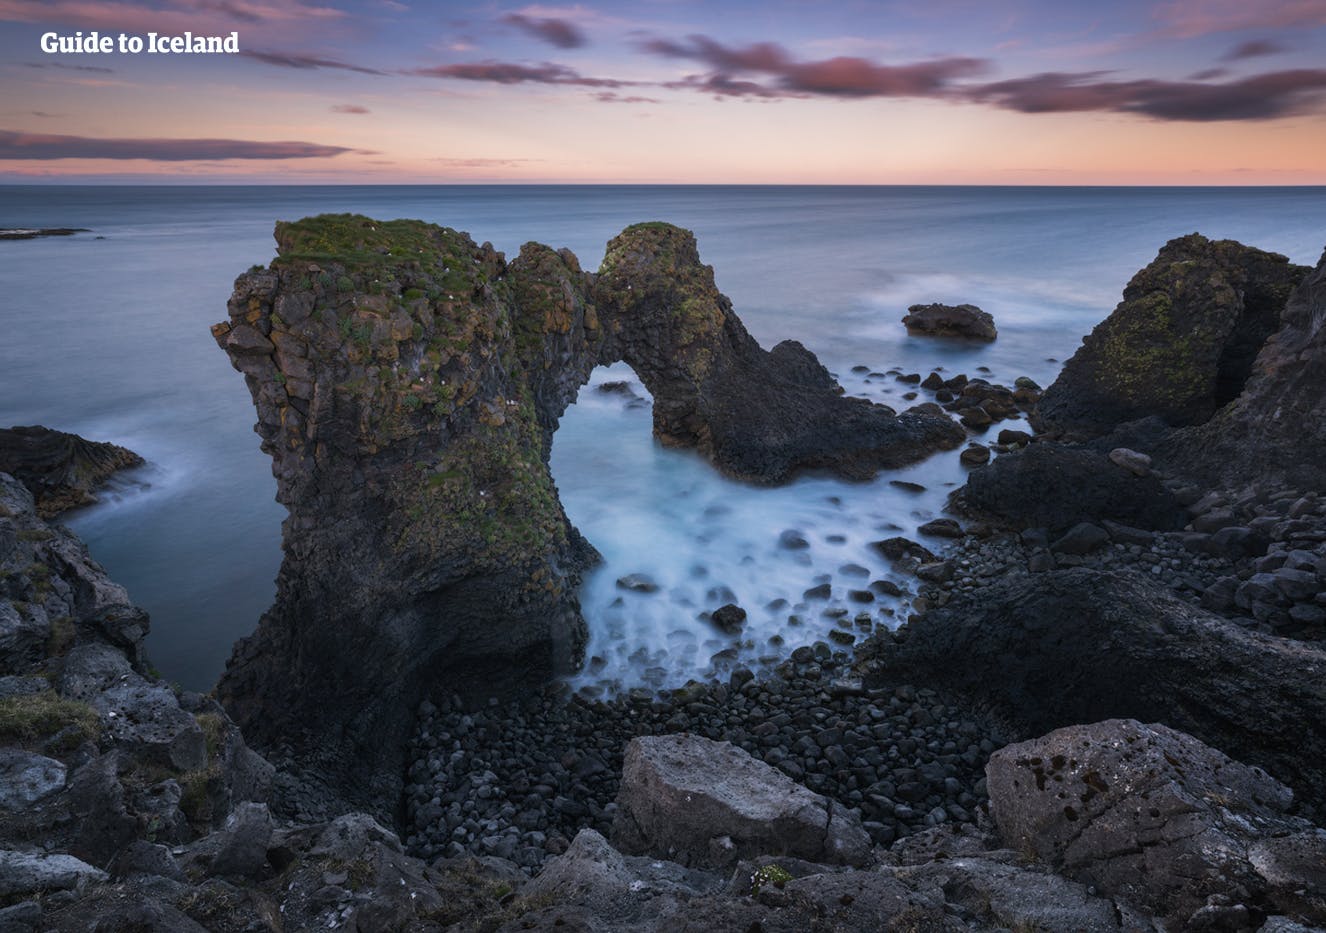 Gatklettur is but one of many amazing rock formations found on the Snæfellsnes peninsula in West Iceland.